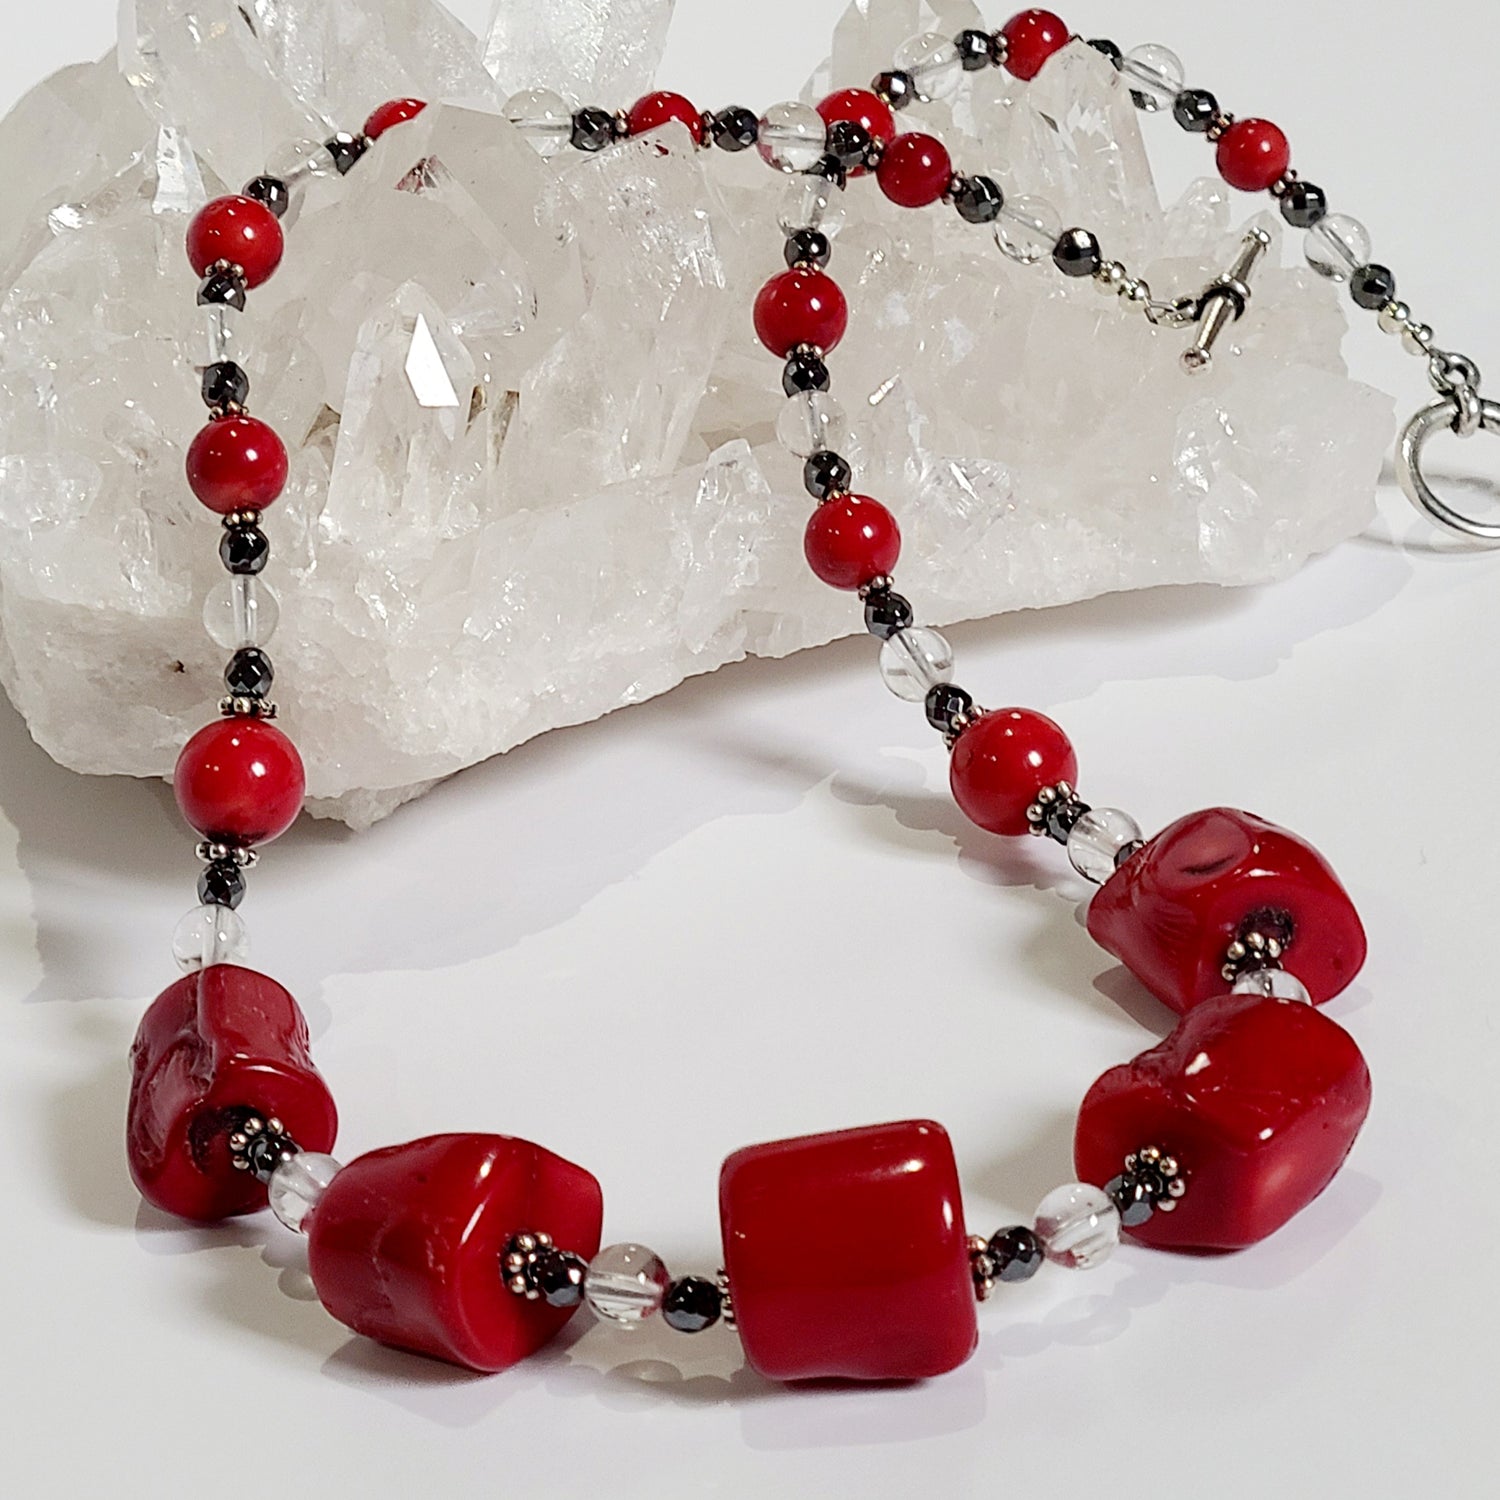 Red Sea Bamboo and Crystal Quartz Necklace